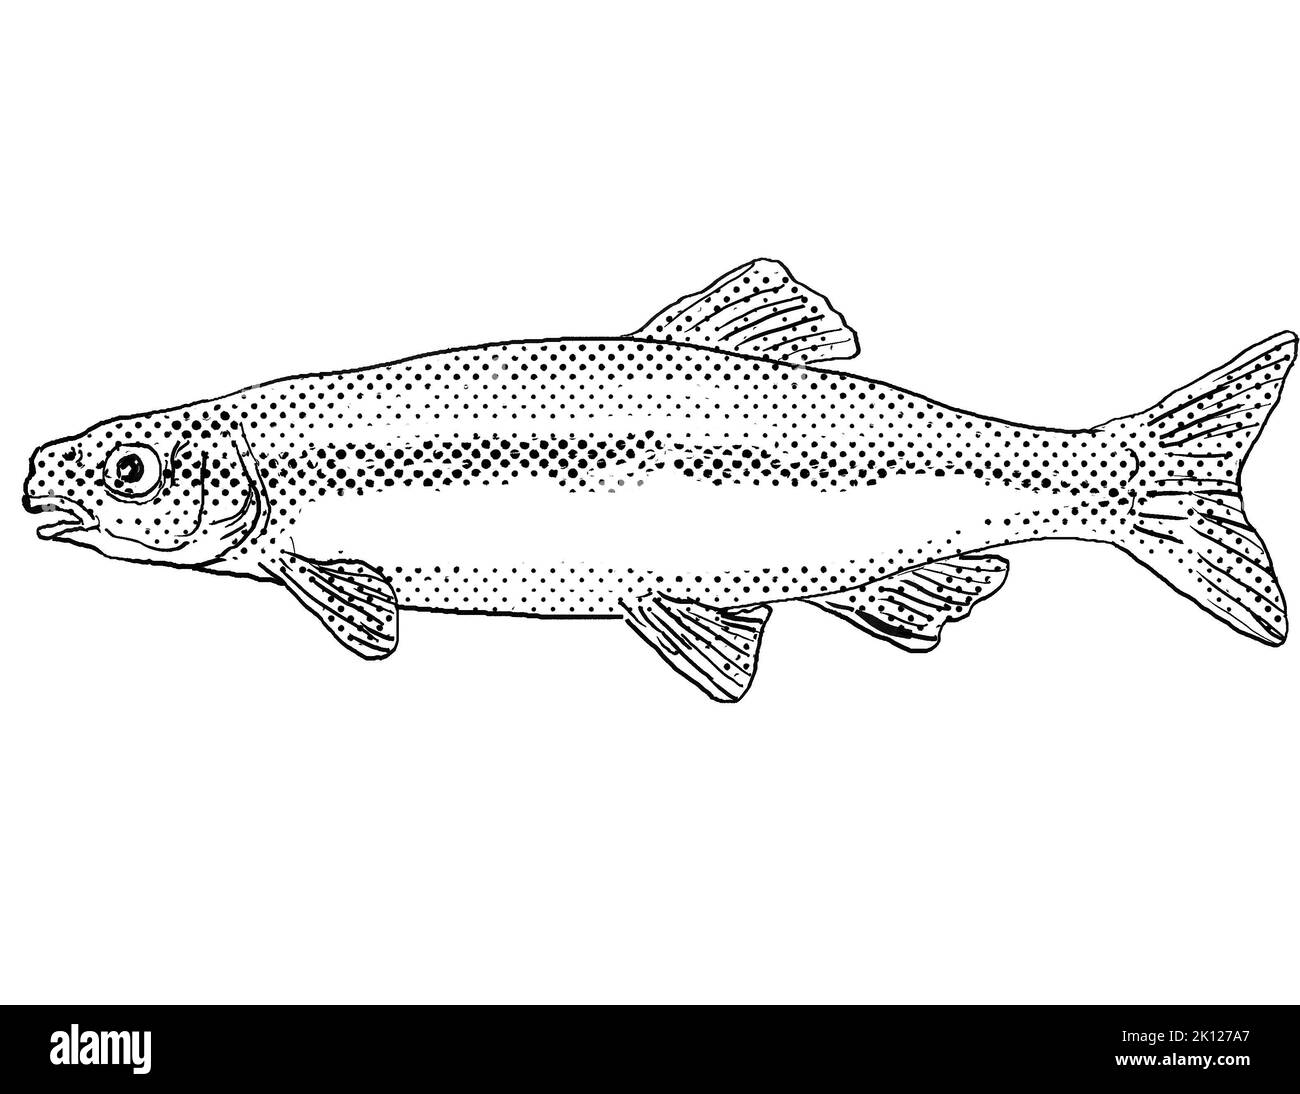 Cartoon style drawing of a bluntnose minnow or Pimephales notatus freshwater fish found in North America with halftone dots on isolated background in Stock Photo